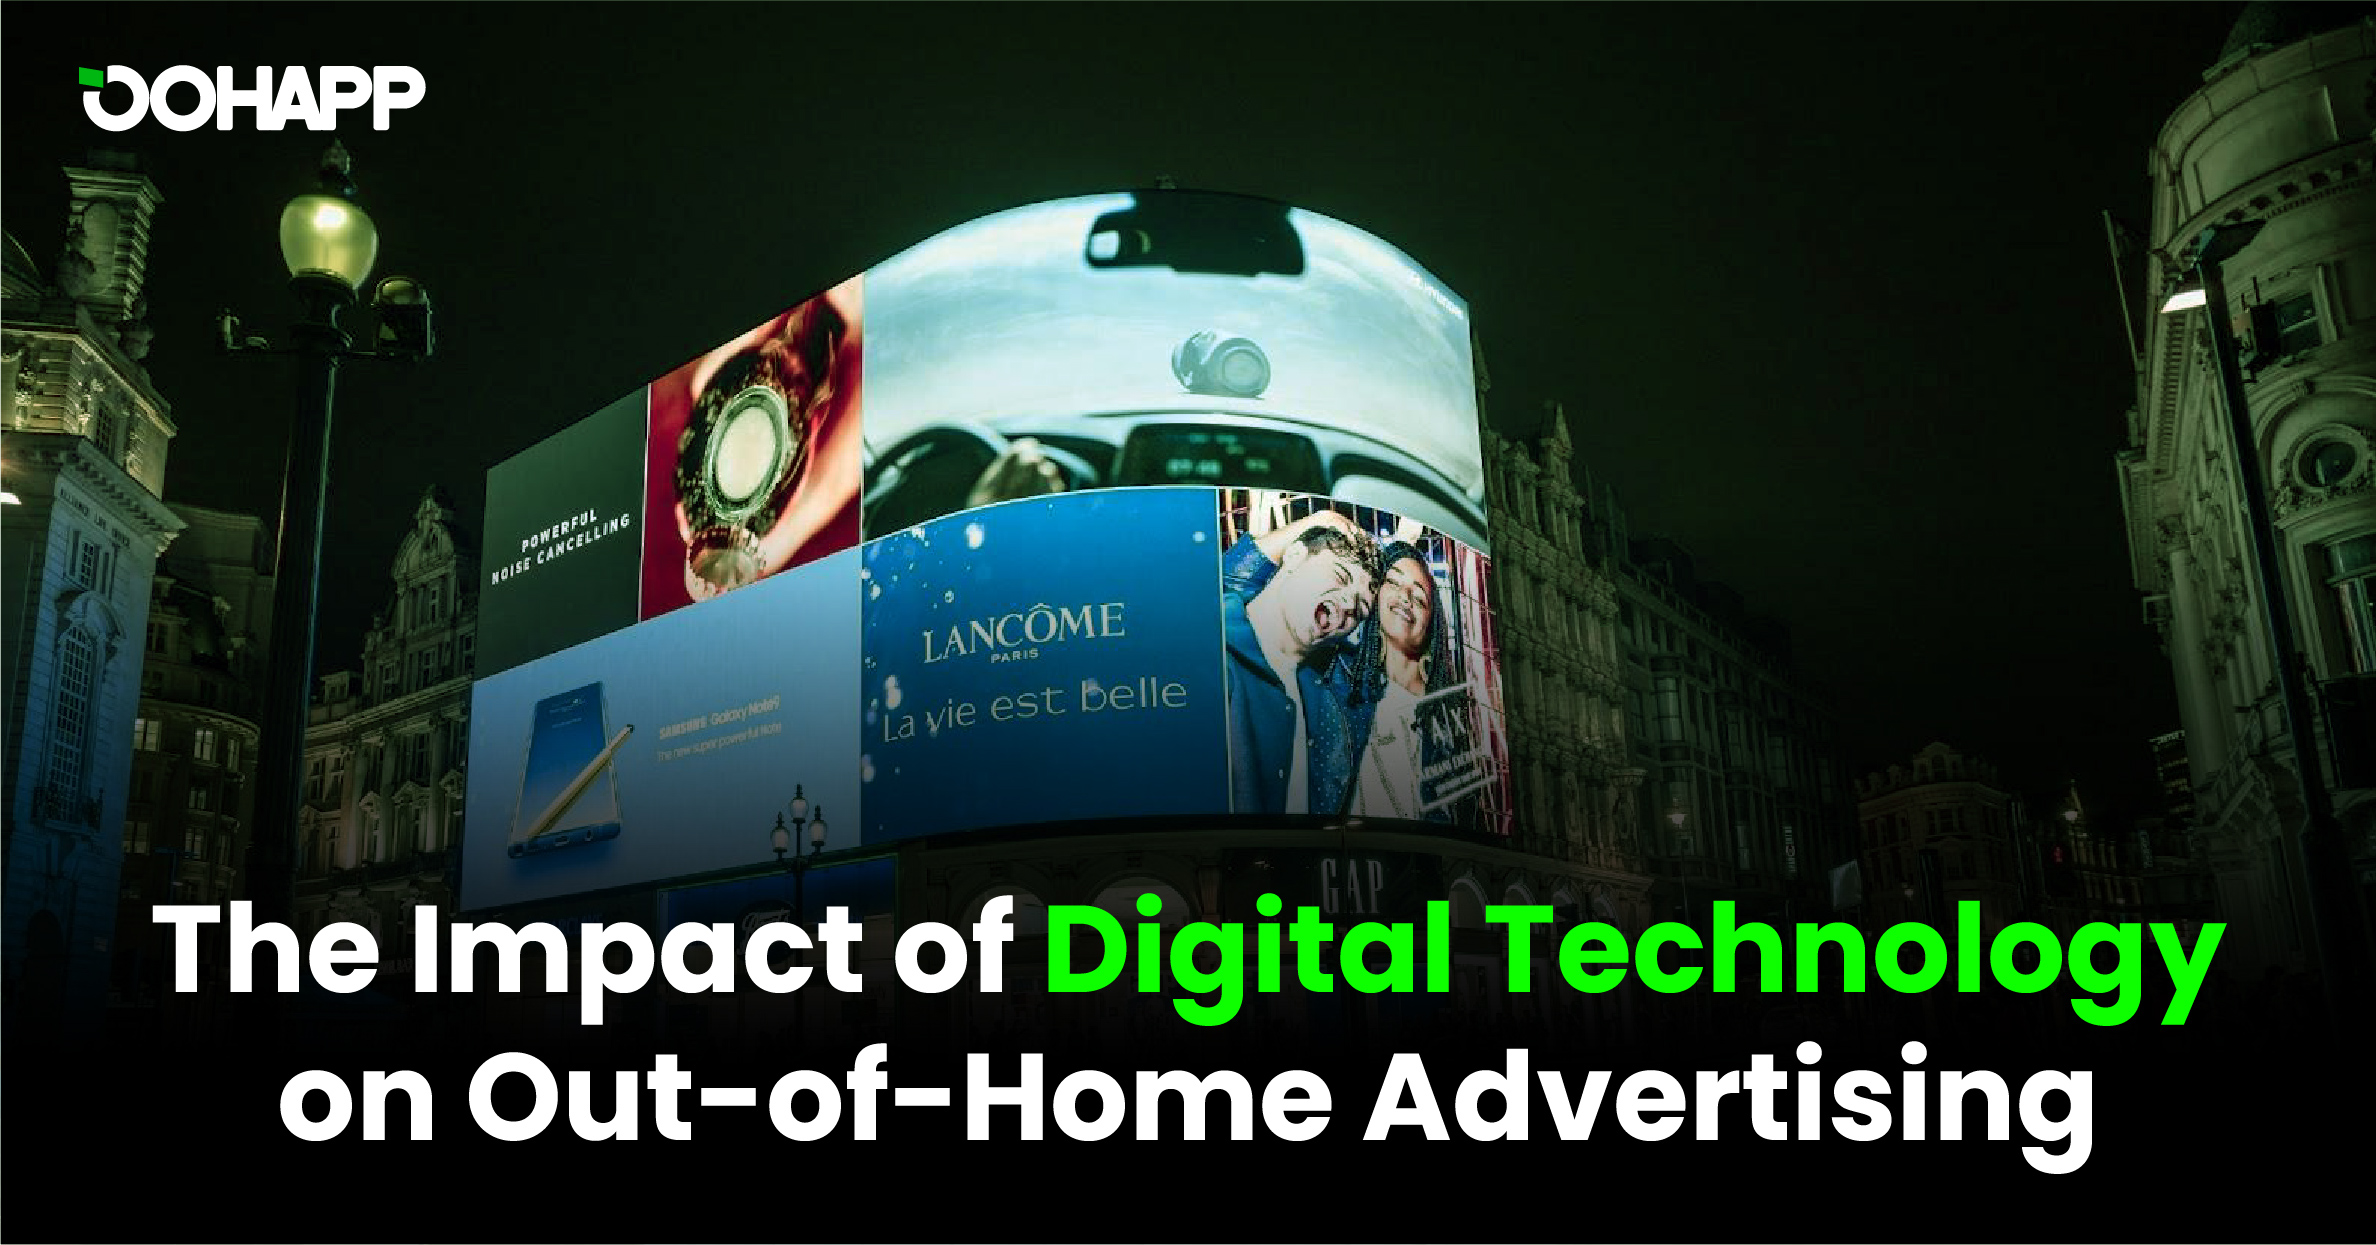 The Impact of Digital Technology on Out-of-Home Advertising